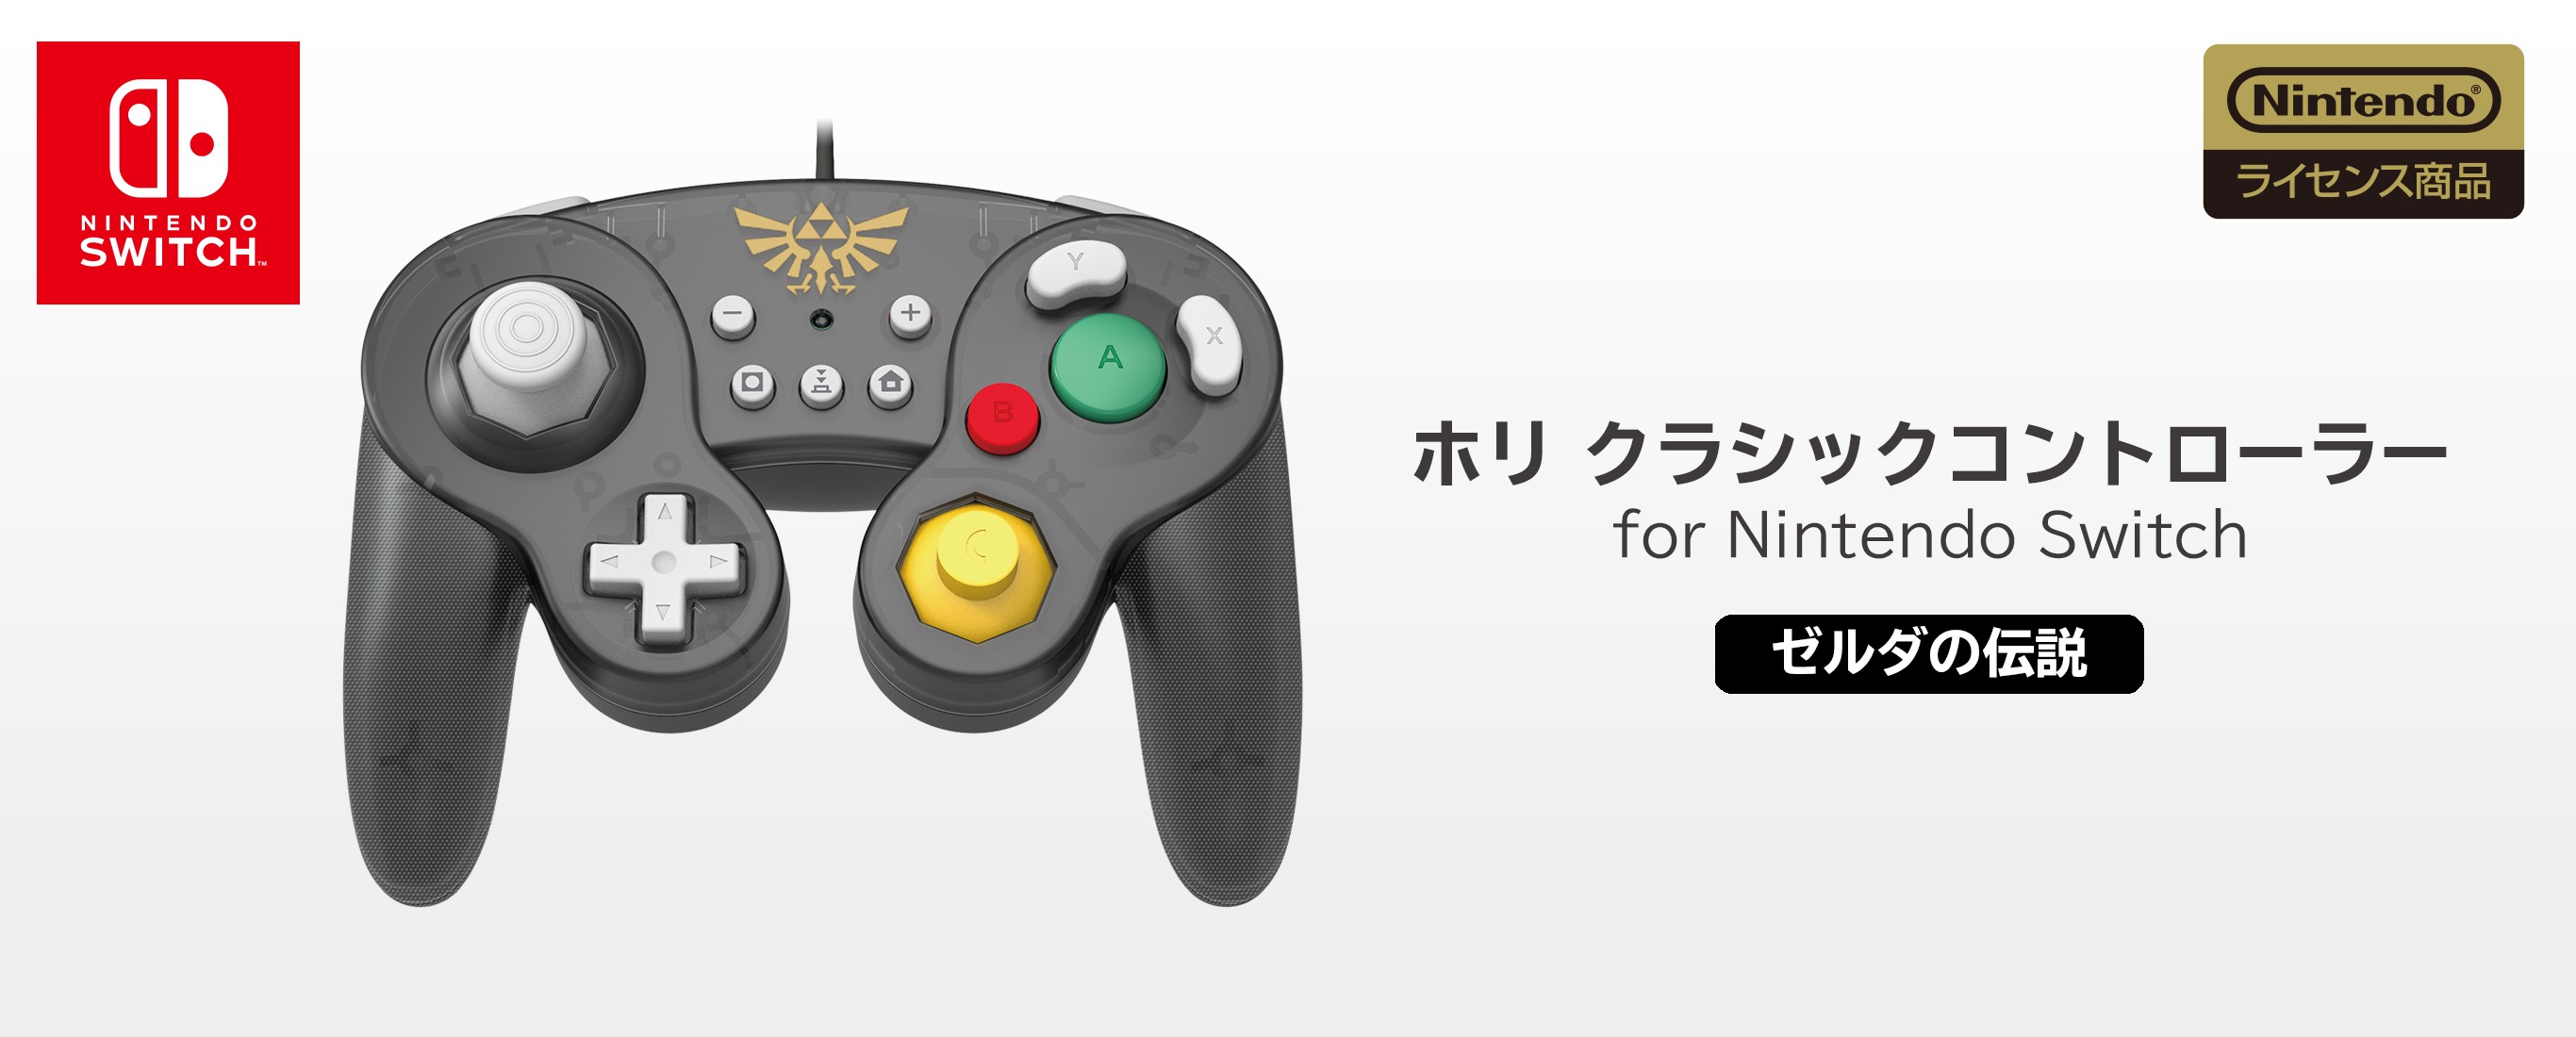 Siliconera GameCube-Style Classic To Controllers In Release Switch Hori For - Nintendo October